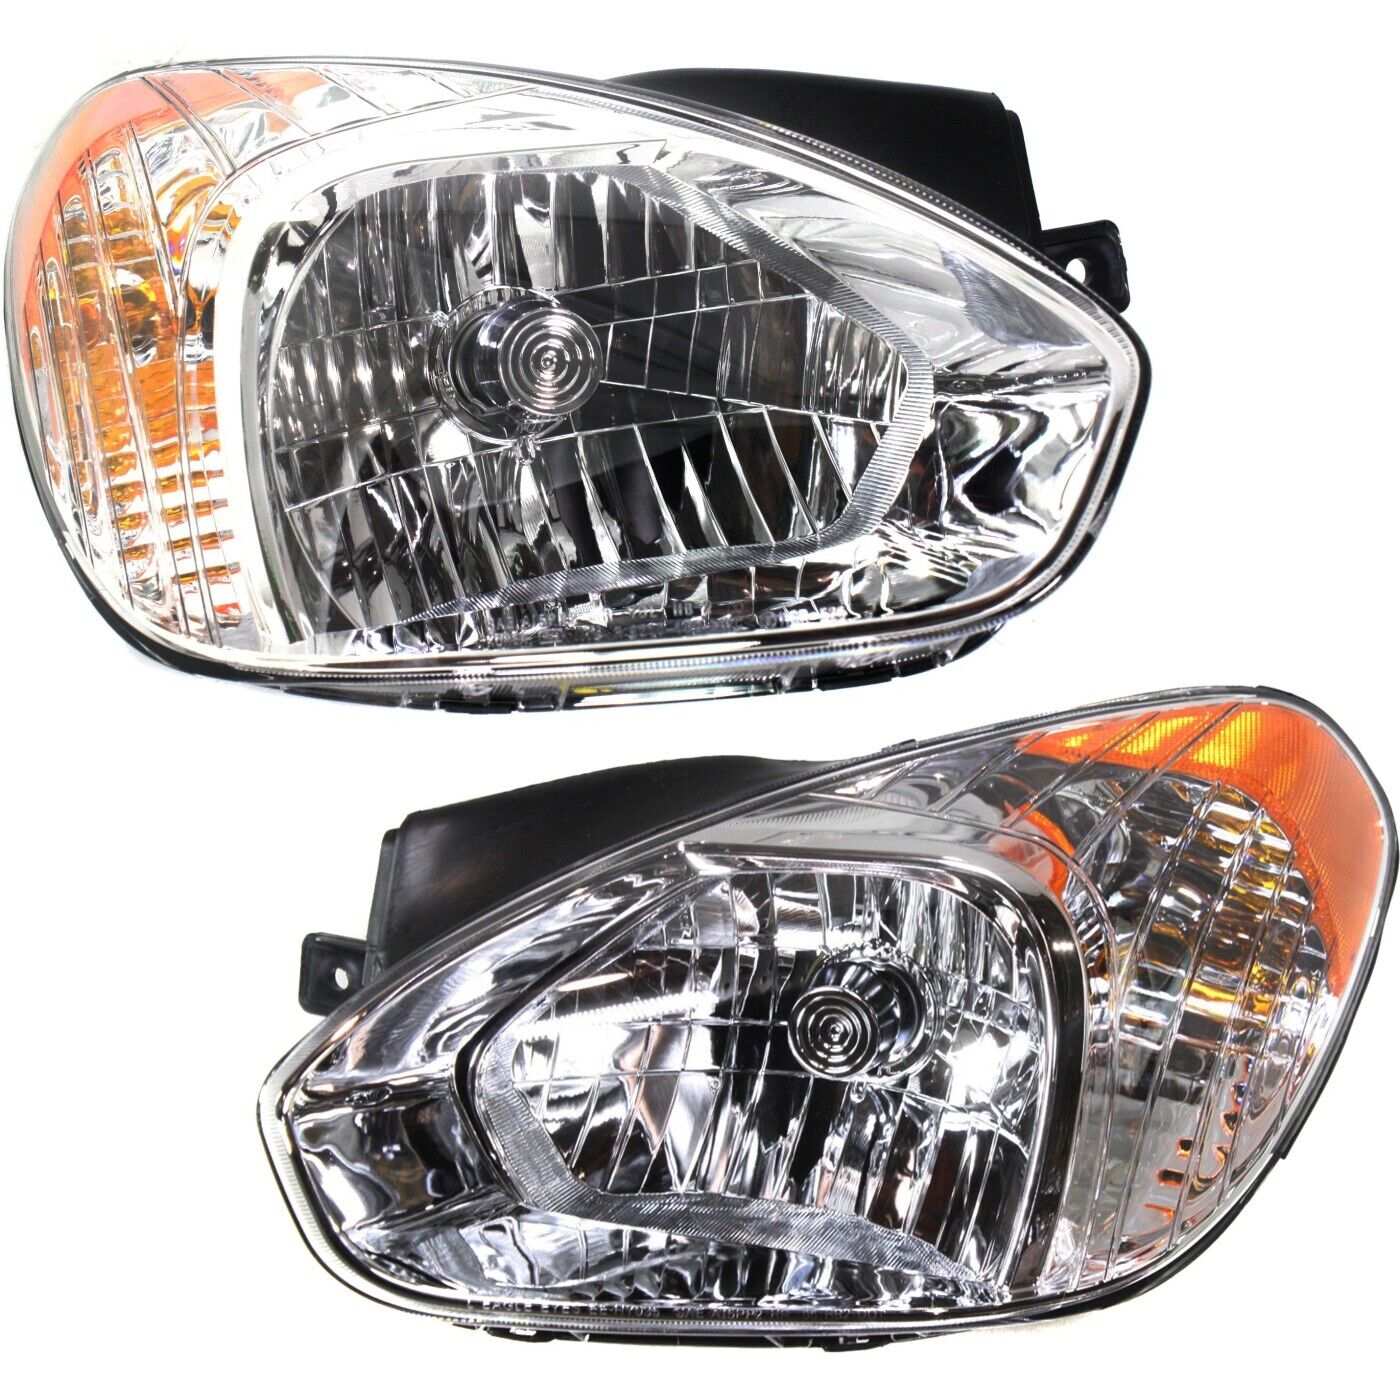 Headlight Set For 2006-2011 Hyundai Accent Driver and Passenger Side with bulb